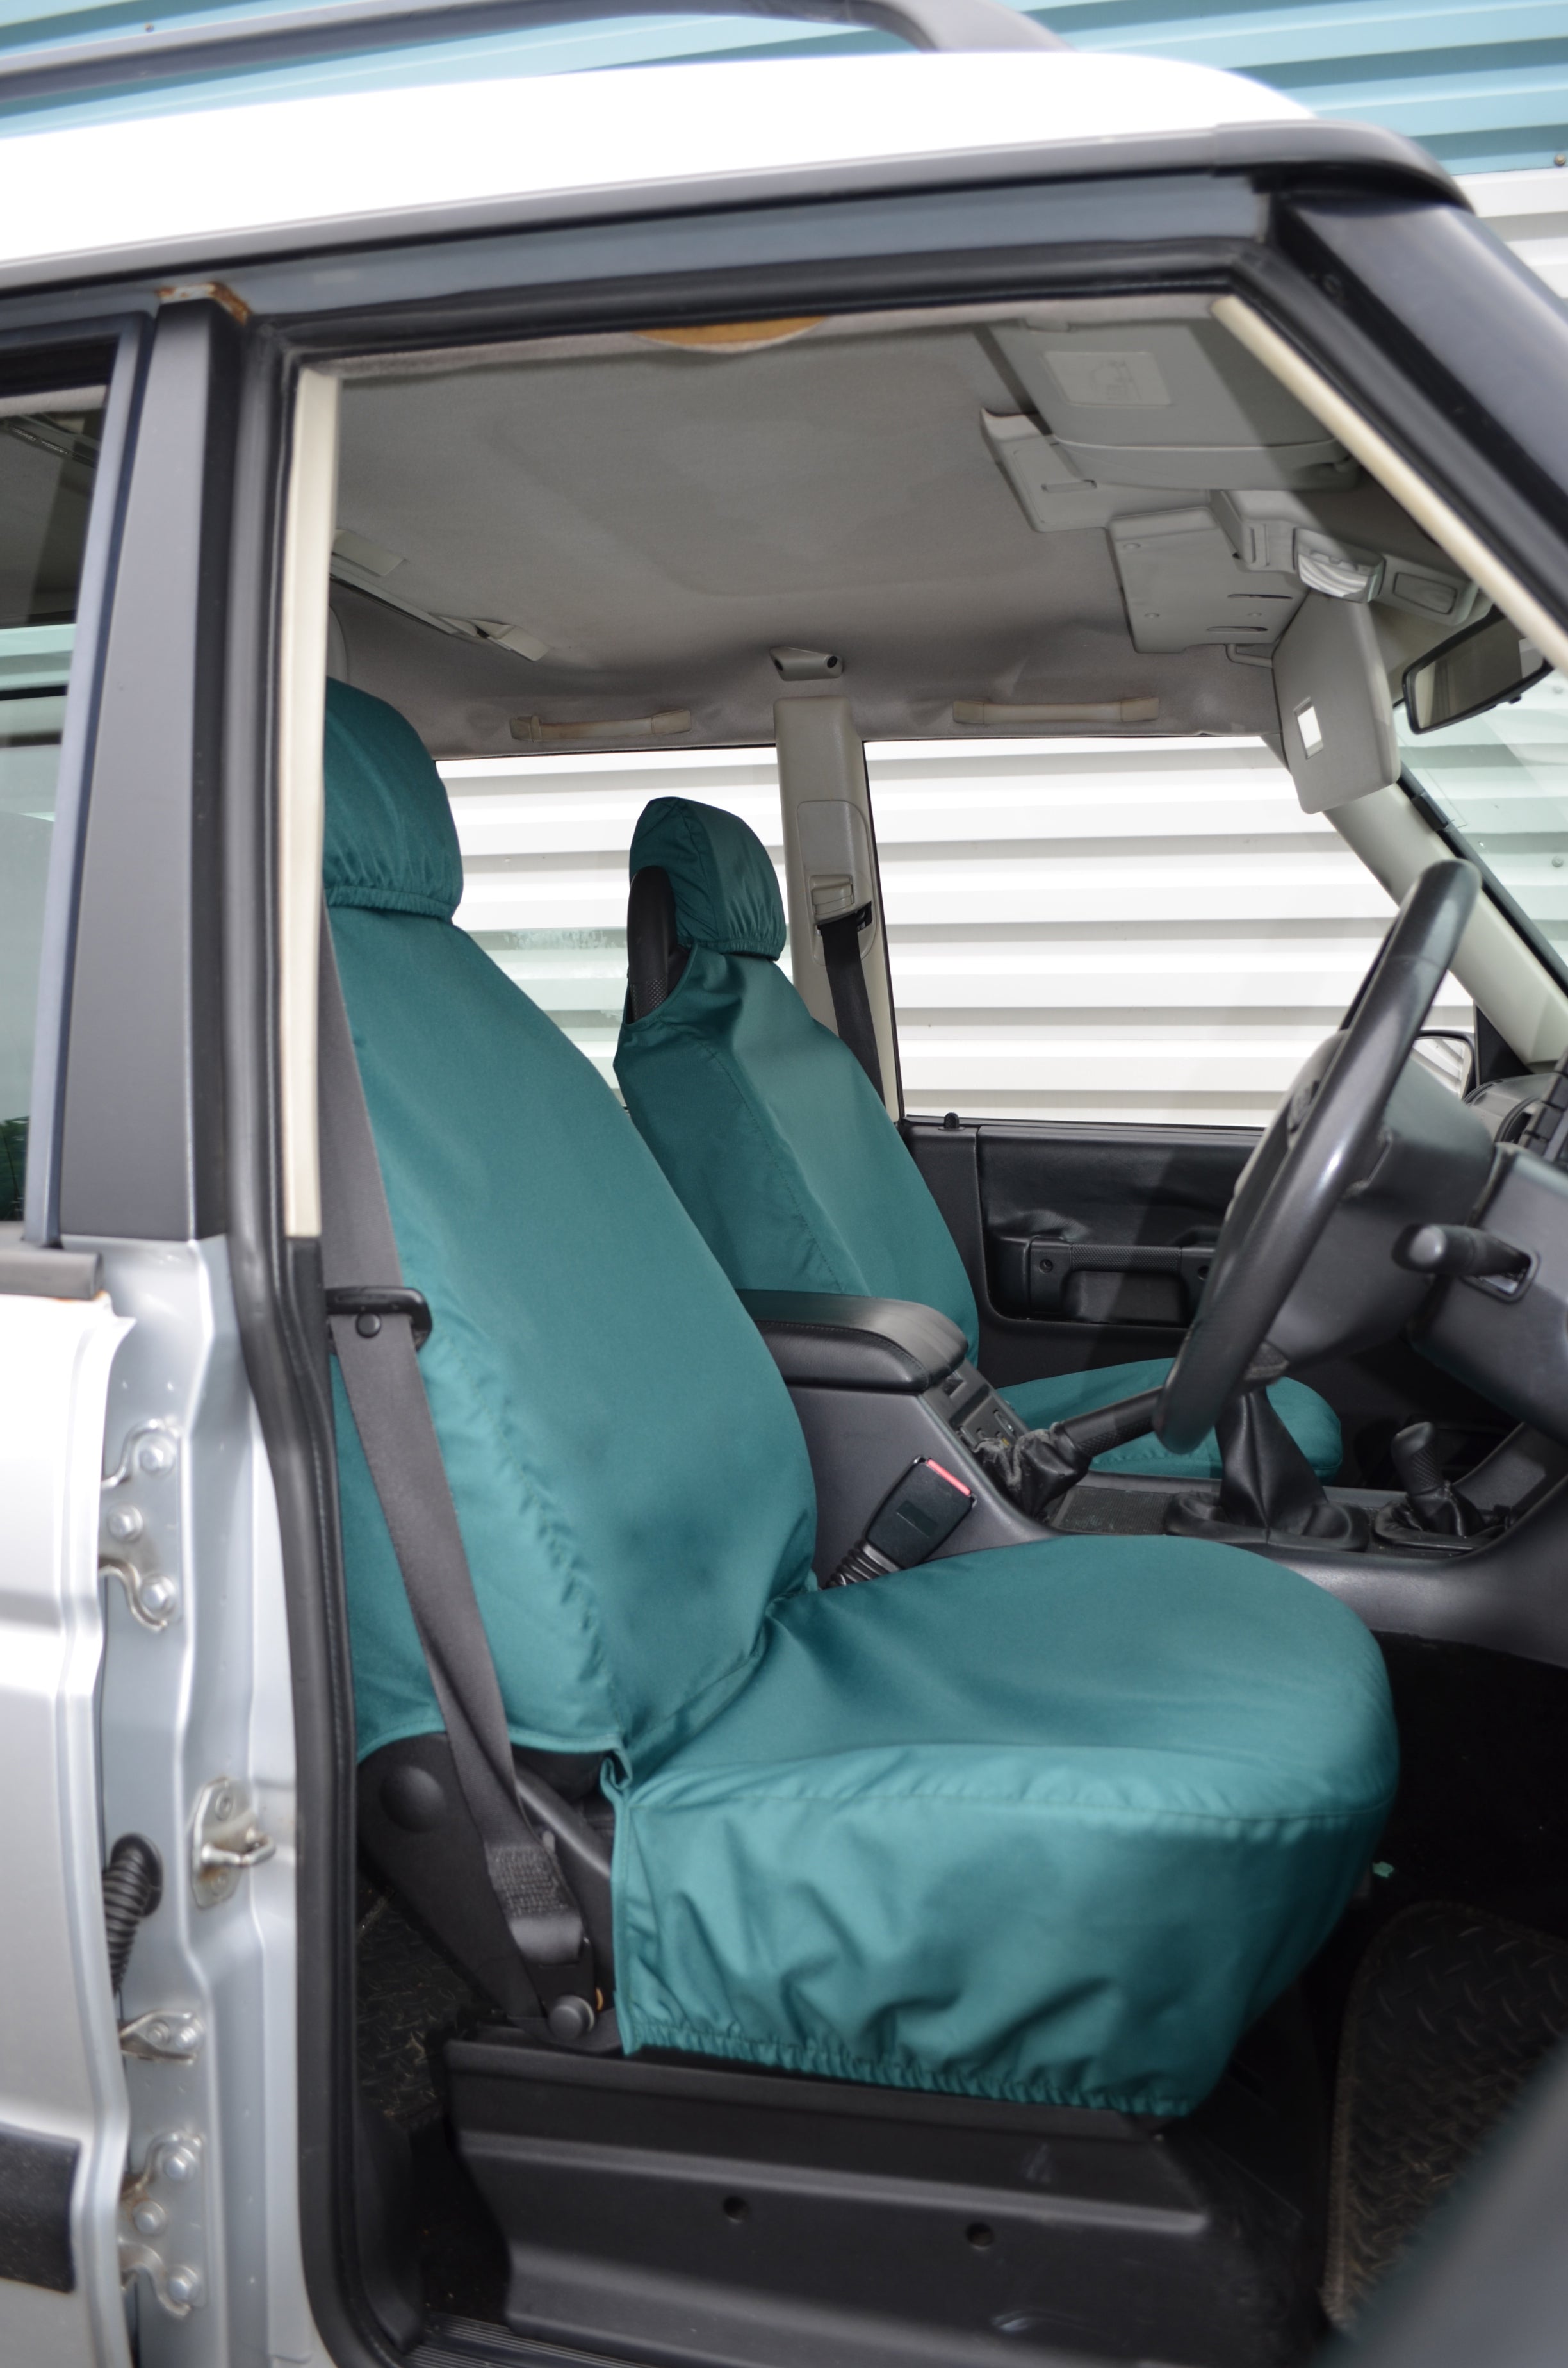 Land Rover Discovery 1998 - 2004 Series 2 Seat Covers Front Pair / Green Turtle Covers Ltd